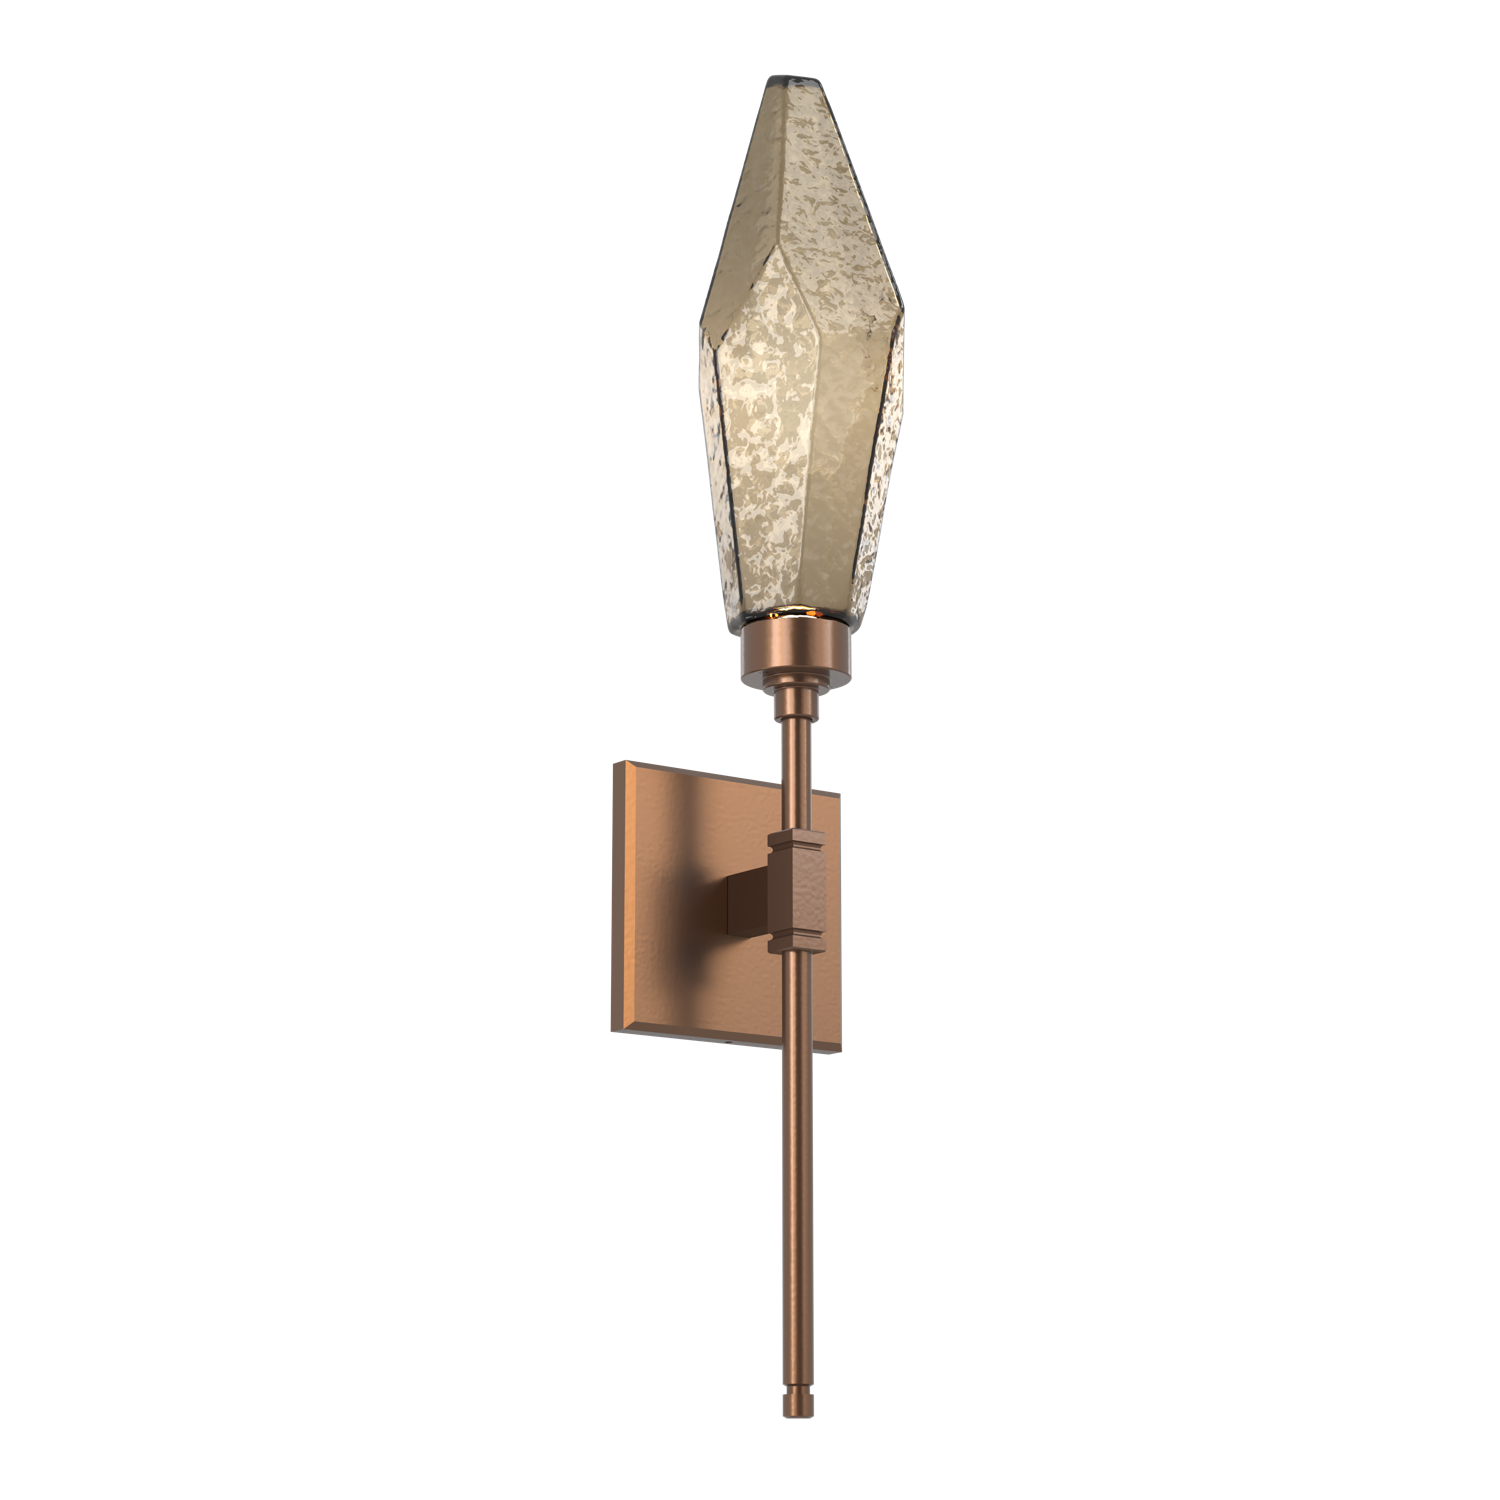 IDB0050-04-BB-CB-Hammerton-Studio-Rock-Crystal-ada-certified-belvedere-wall-sconce-with-burnished-bronze-finish-and-chilled-bronze-blown-glass-shades-and-LED-lamping